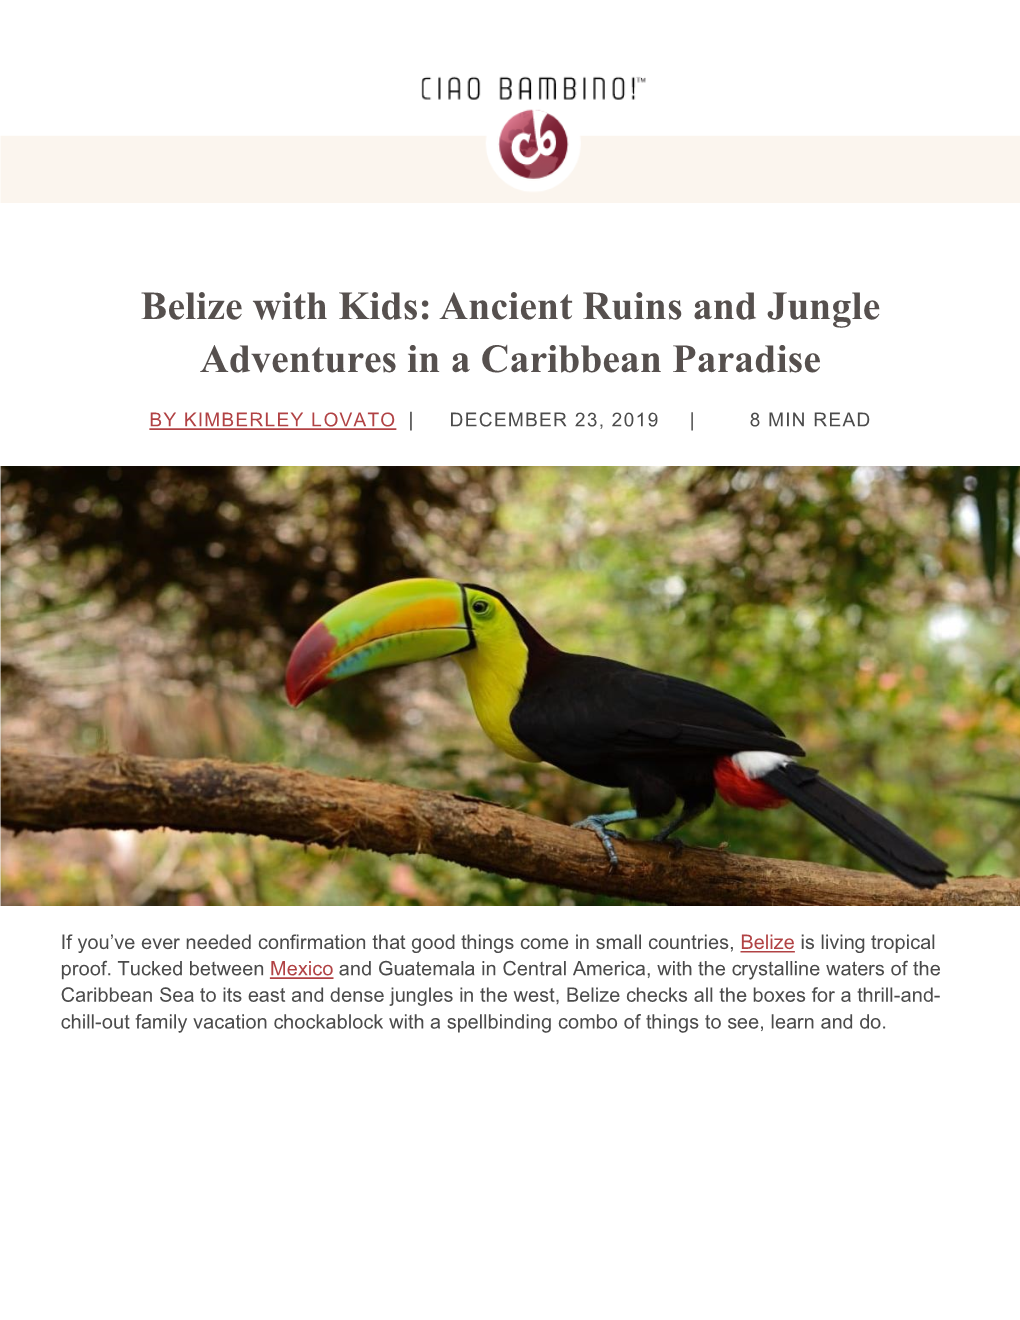 Belize with Kids: Ancient Ruins and Jungle Adventures in a Caribbean Paradise